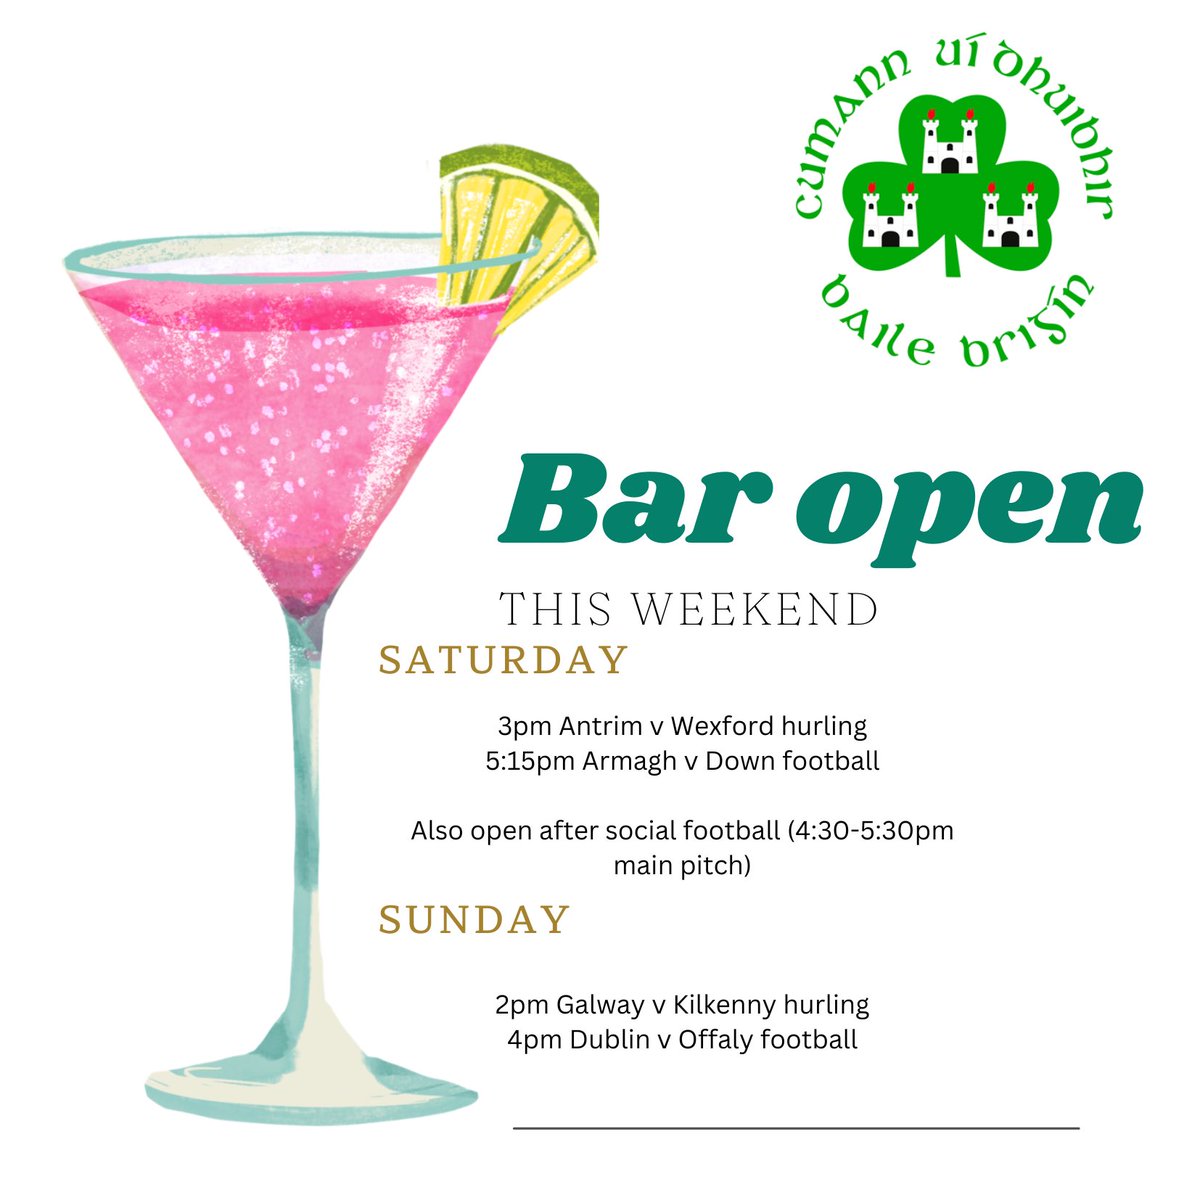 Bar open this weekend with plenty of games on show!! Open 3pm on Saturday and 2pm on Sunday🎉💚🙌🏼